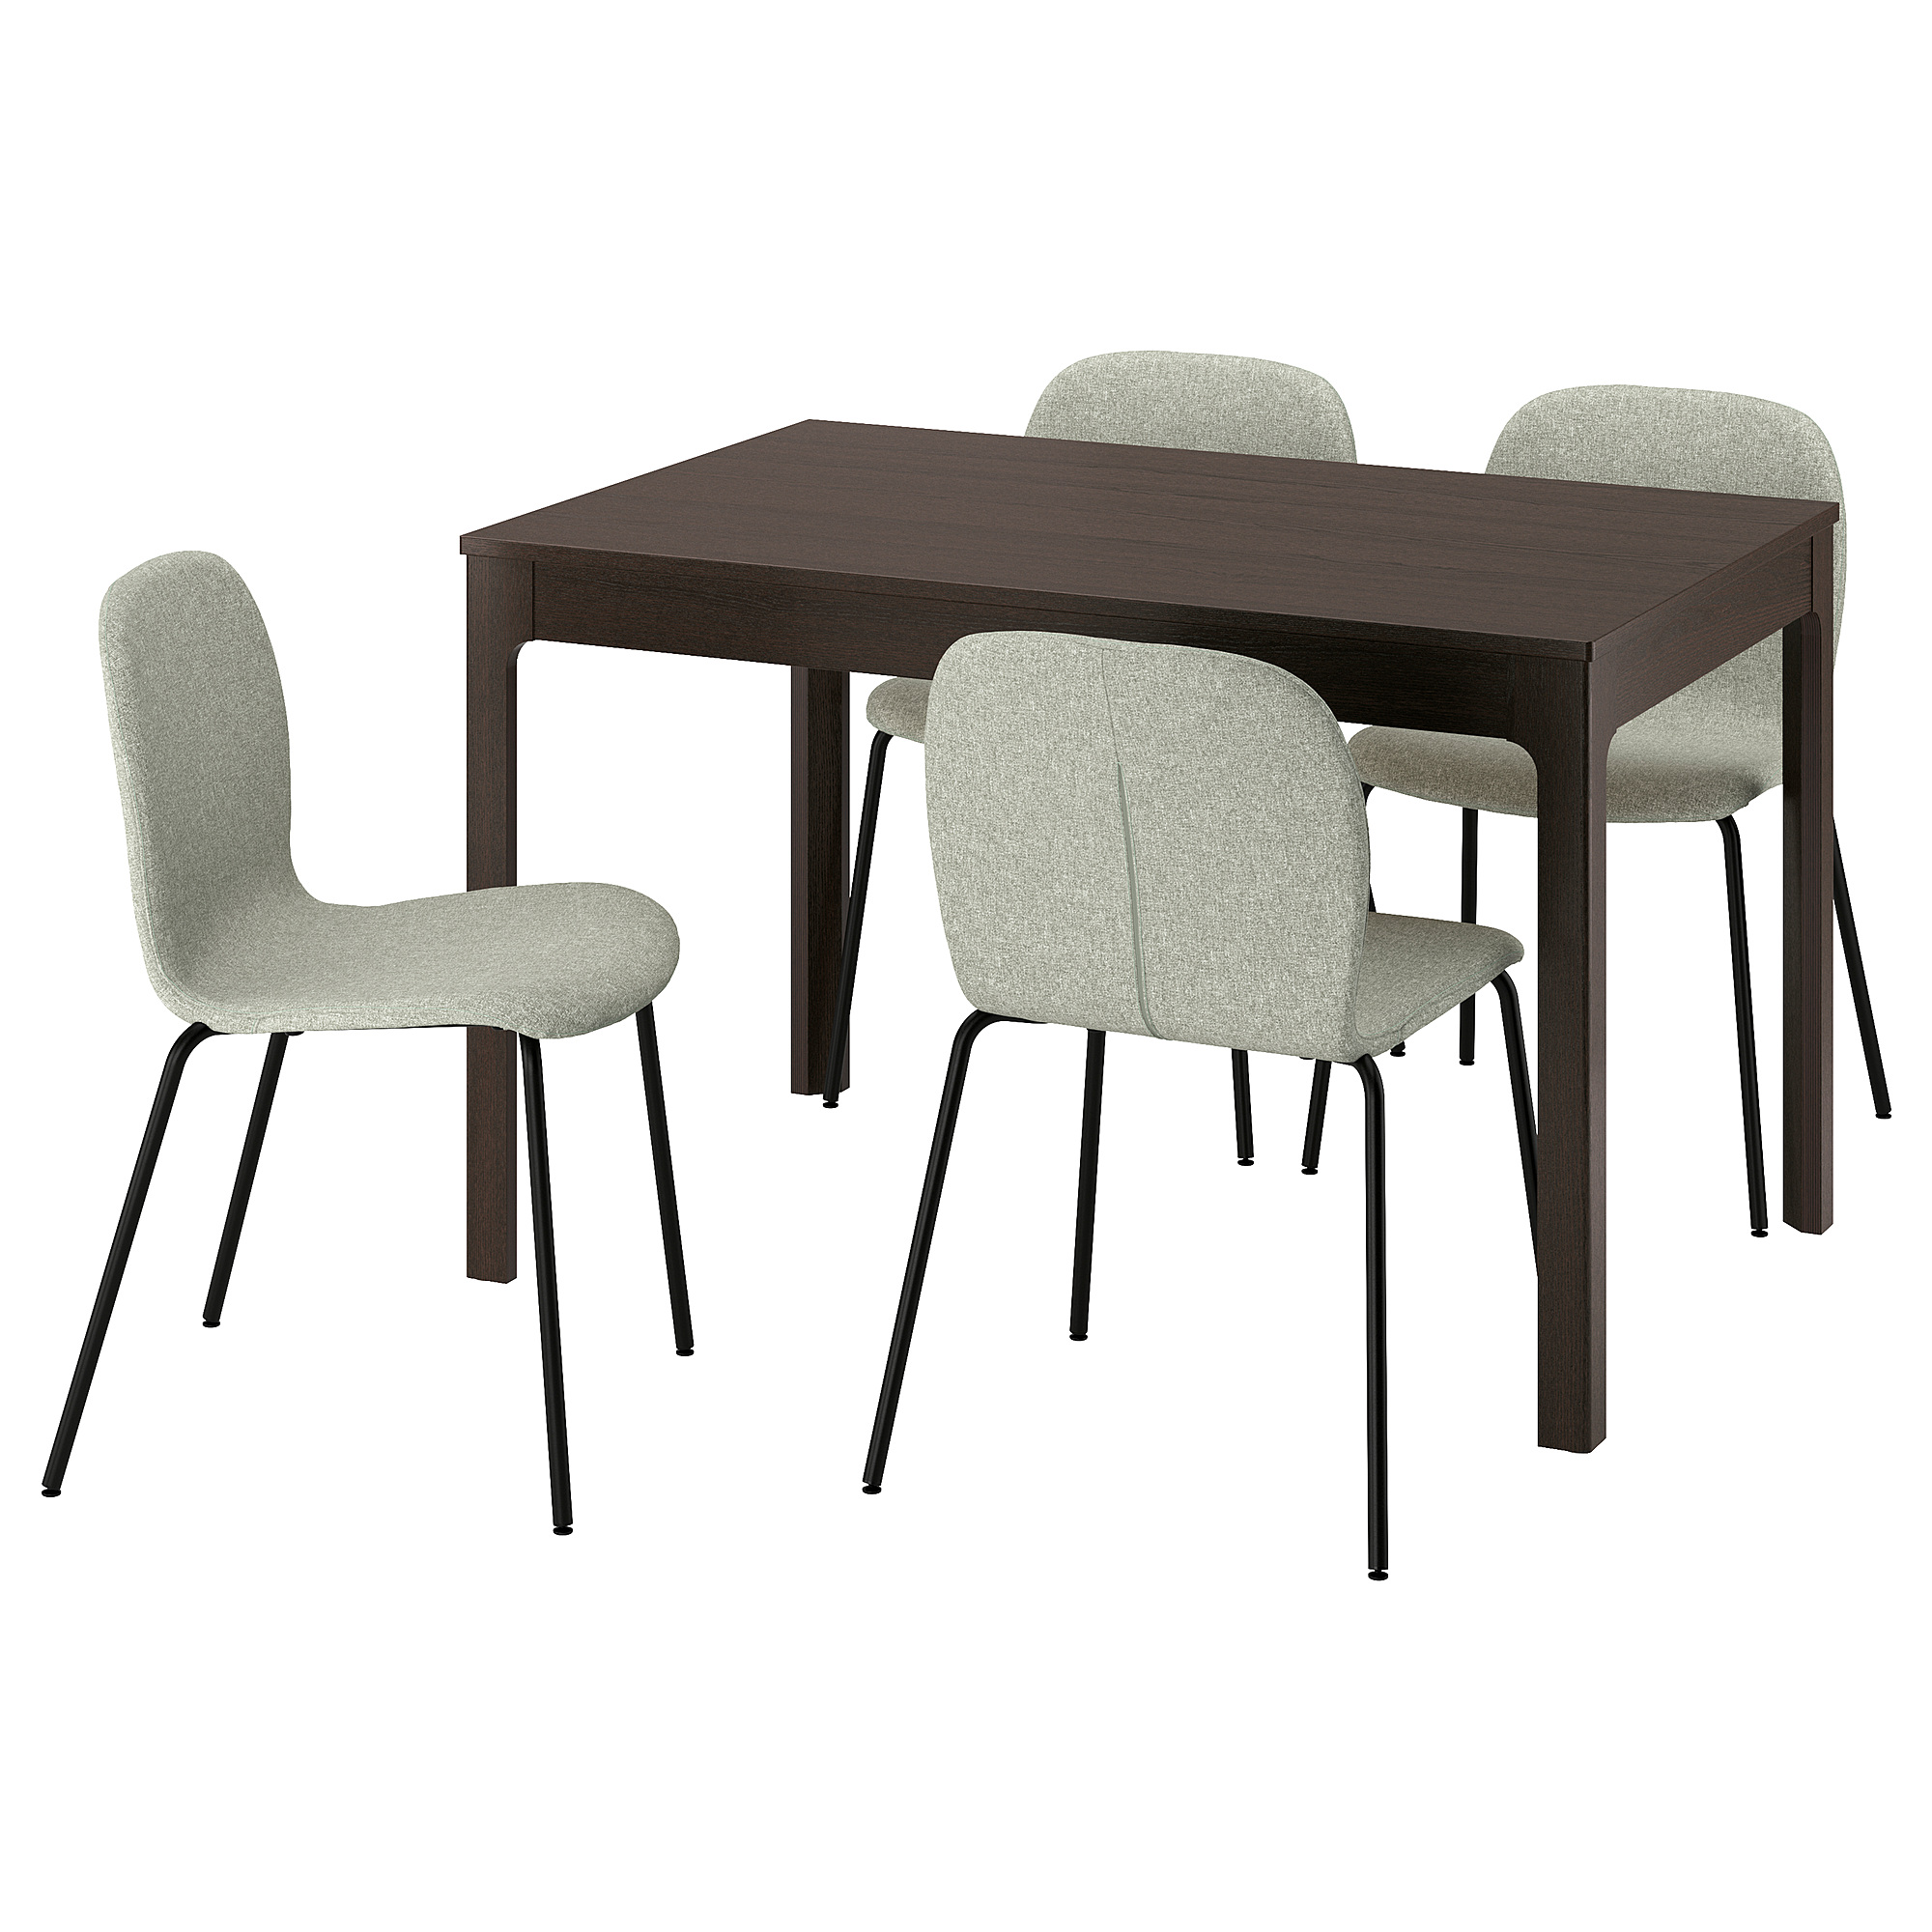 EKEDALEN/KARLPETTER table and 4 chairs